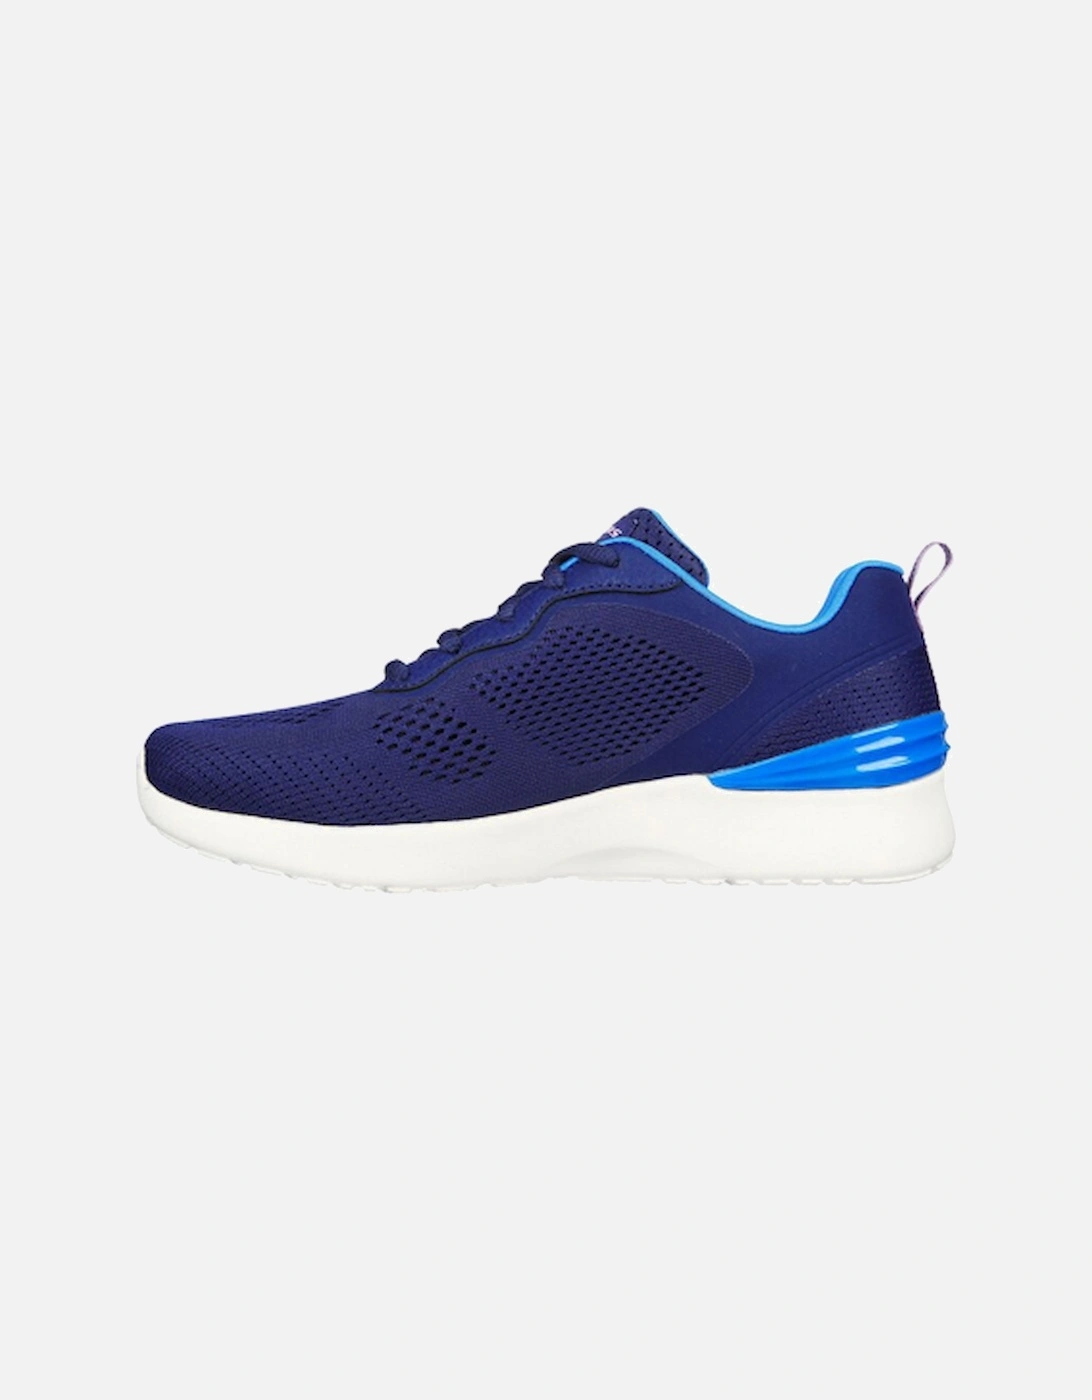 Women's Skech Air Dynamight New Grind Navy Blue